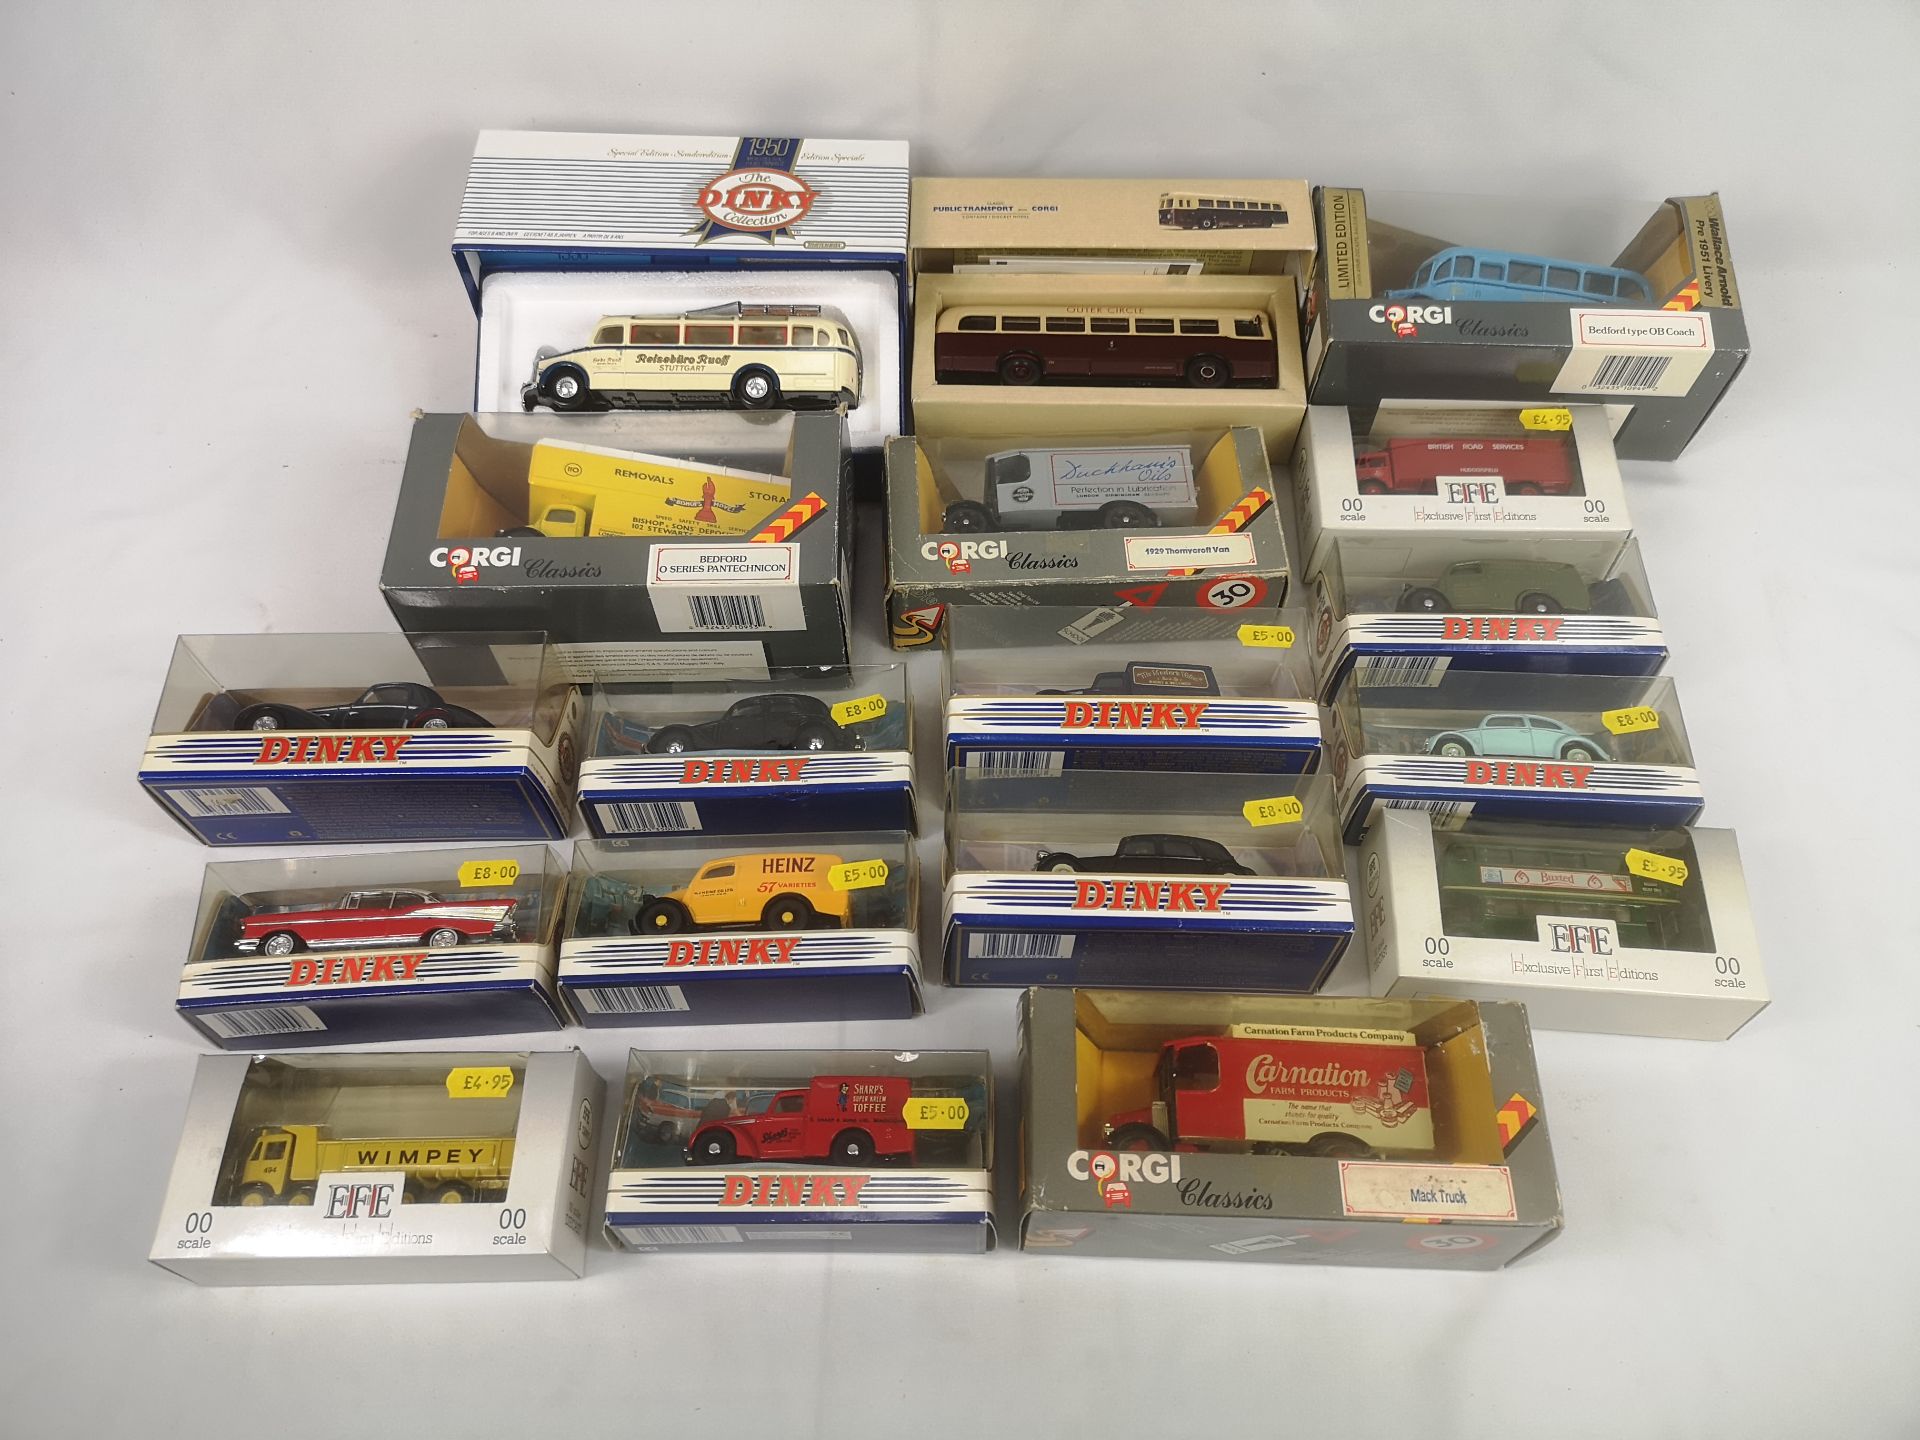 Ten Dinky diecast model vehicles together with a quantity of other diecast model vehicles